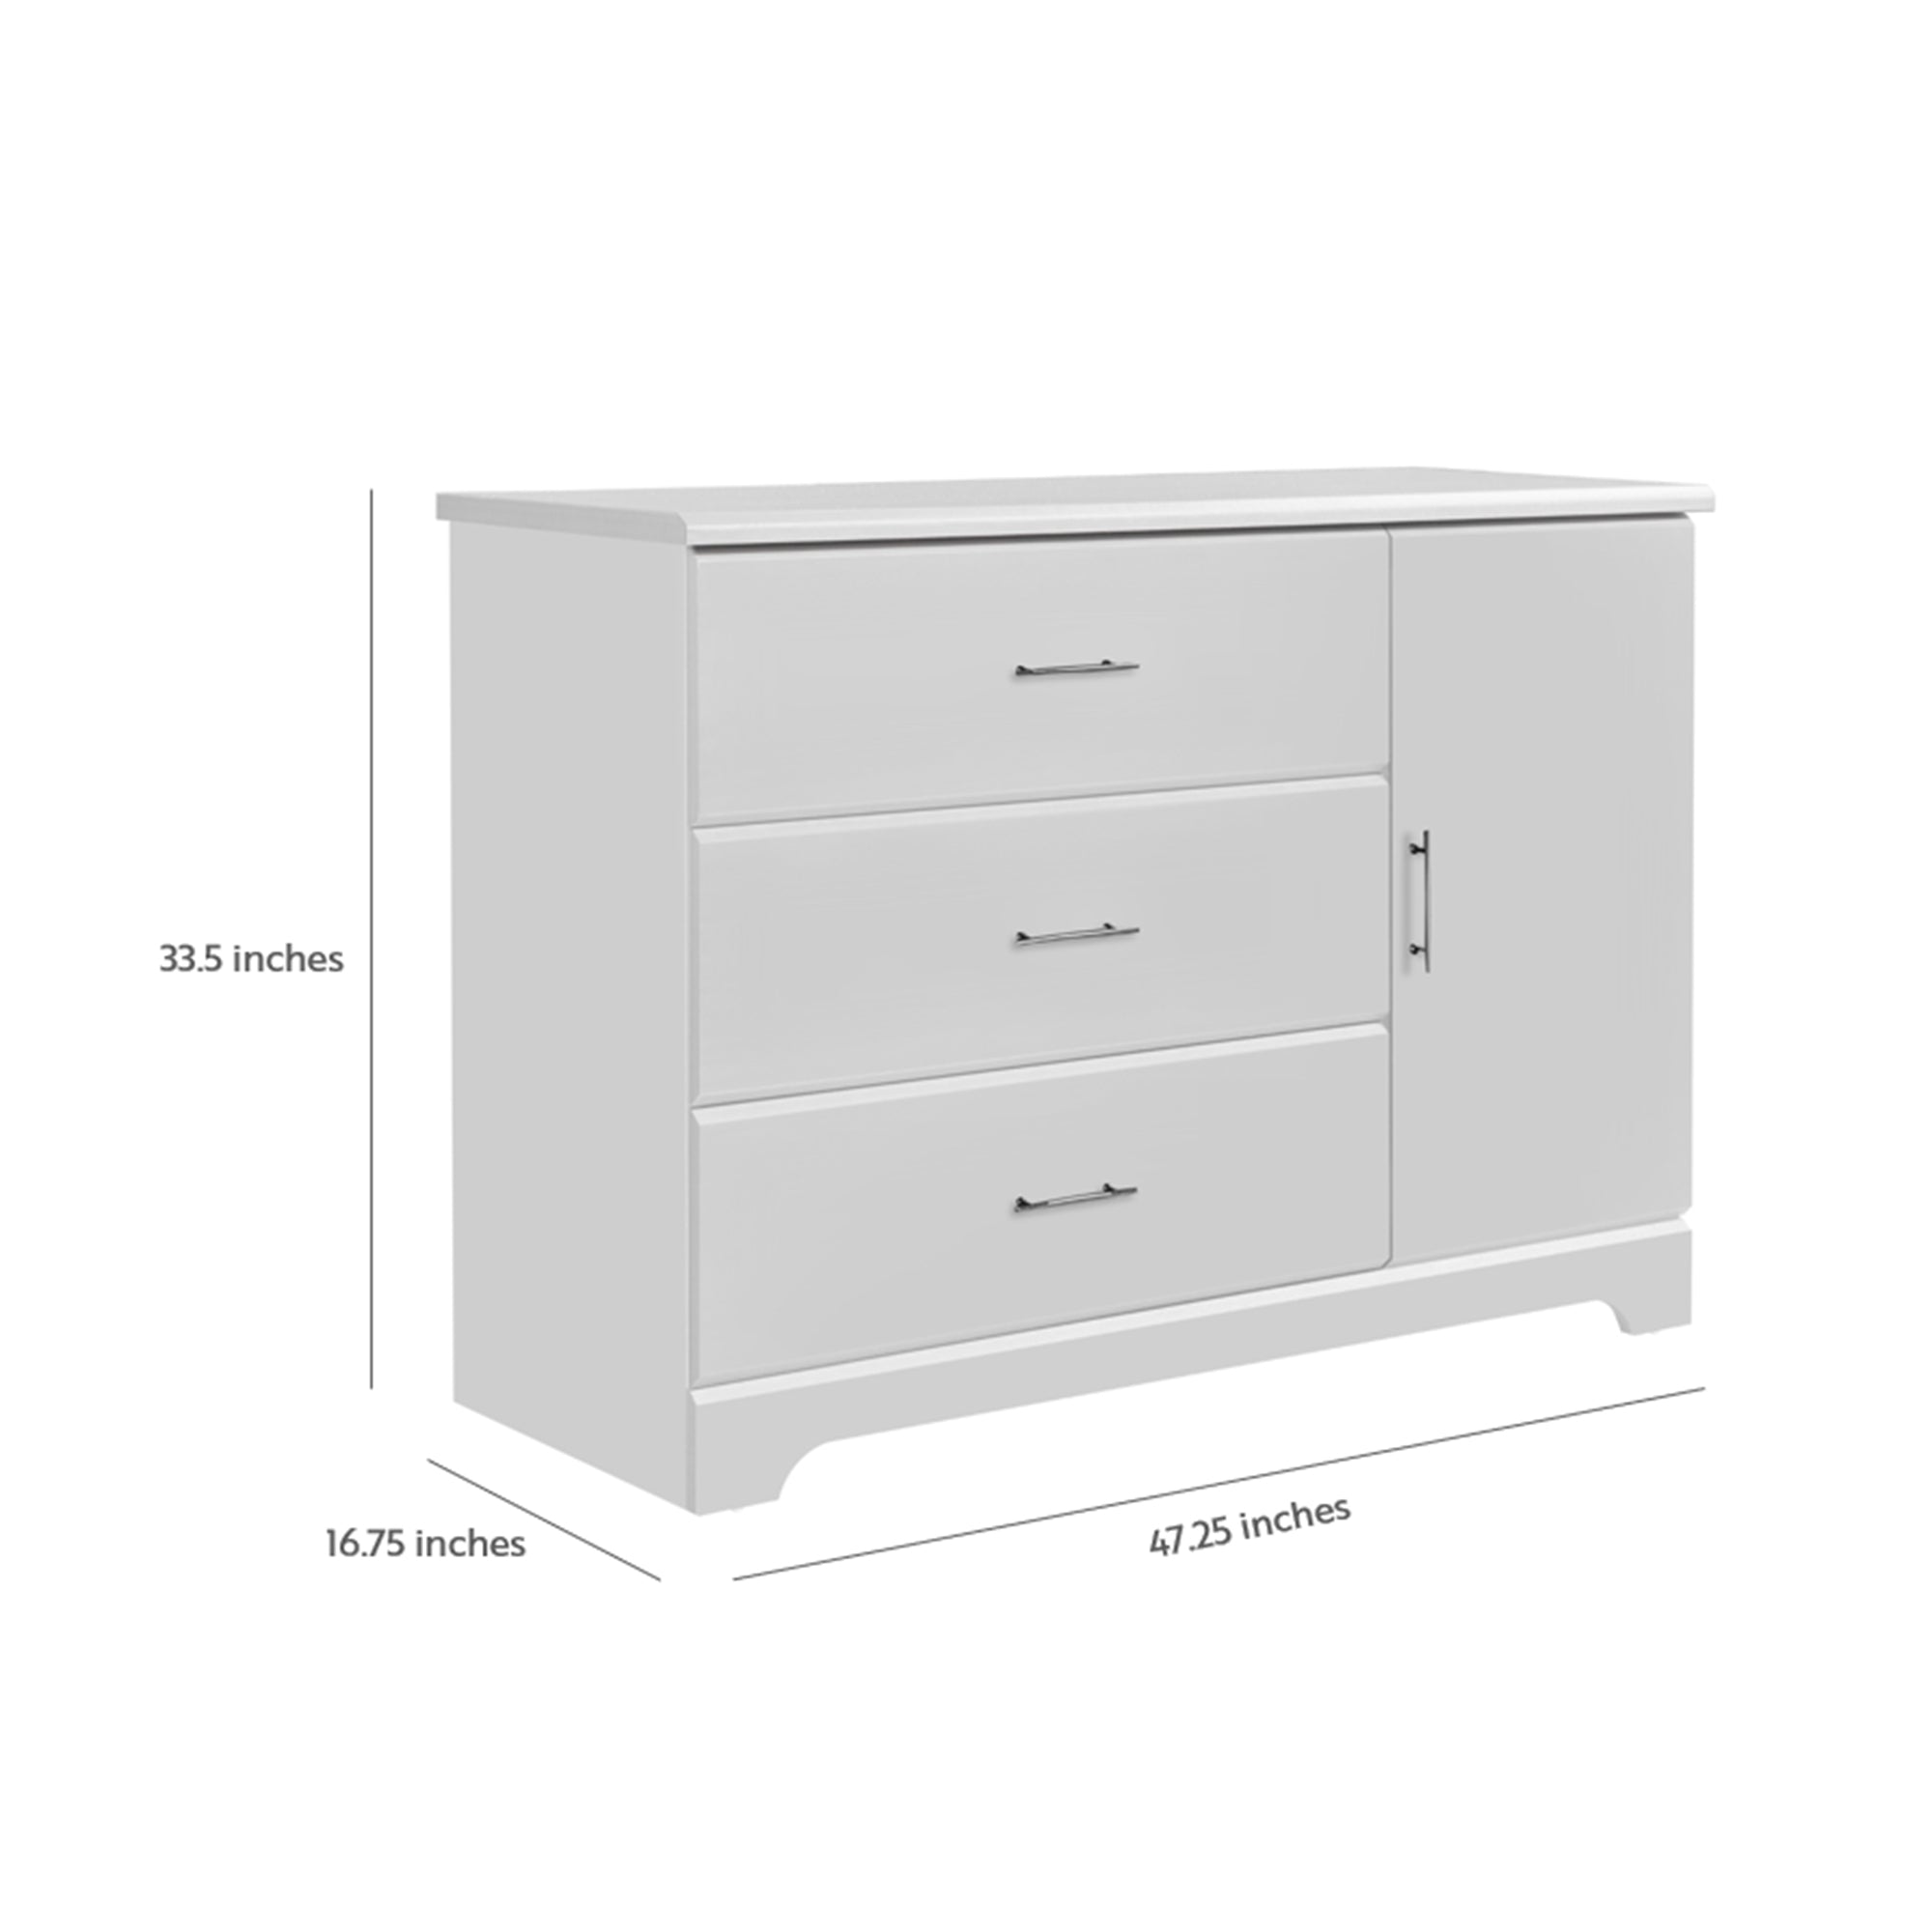 White 3 drawer chest with dimensions